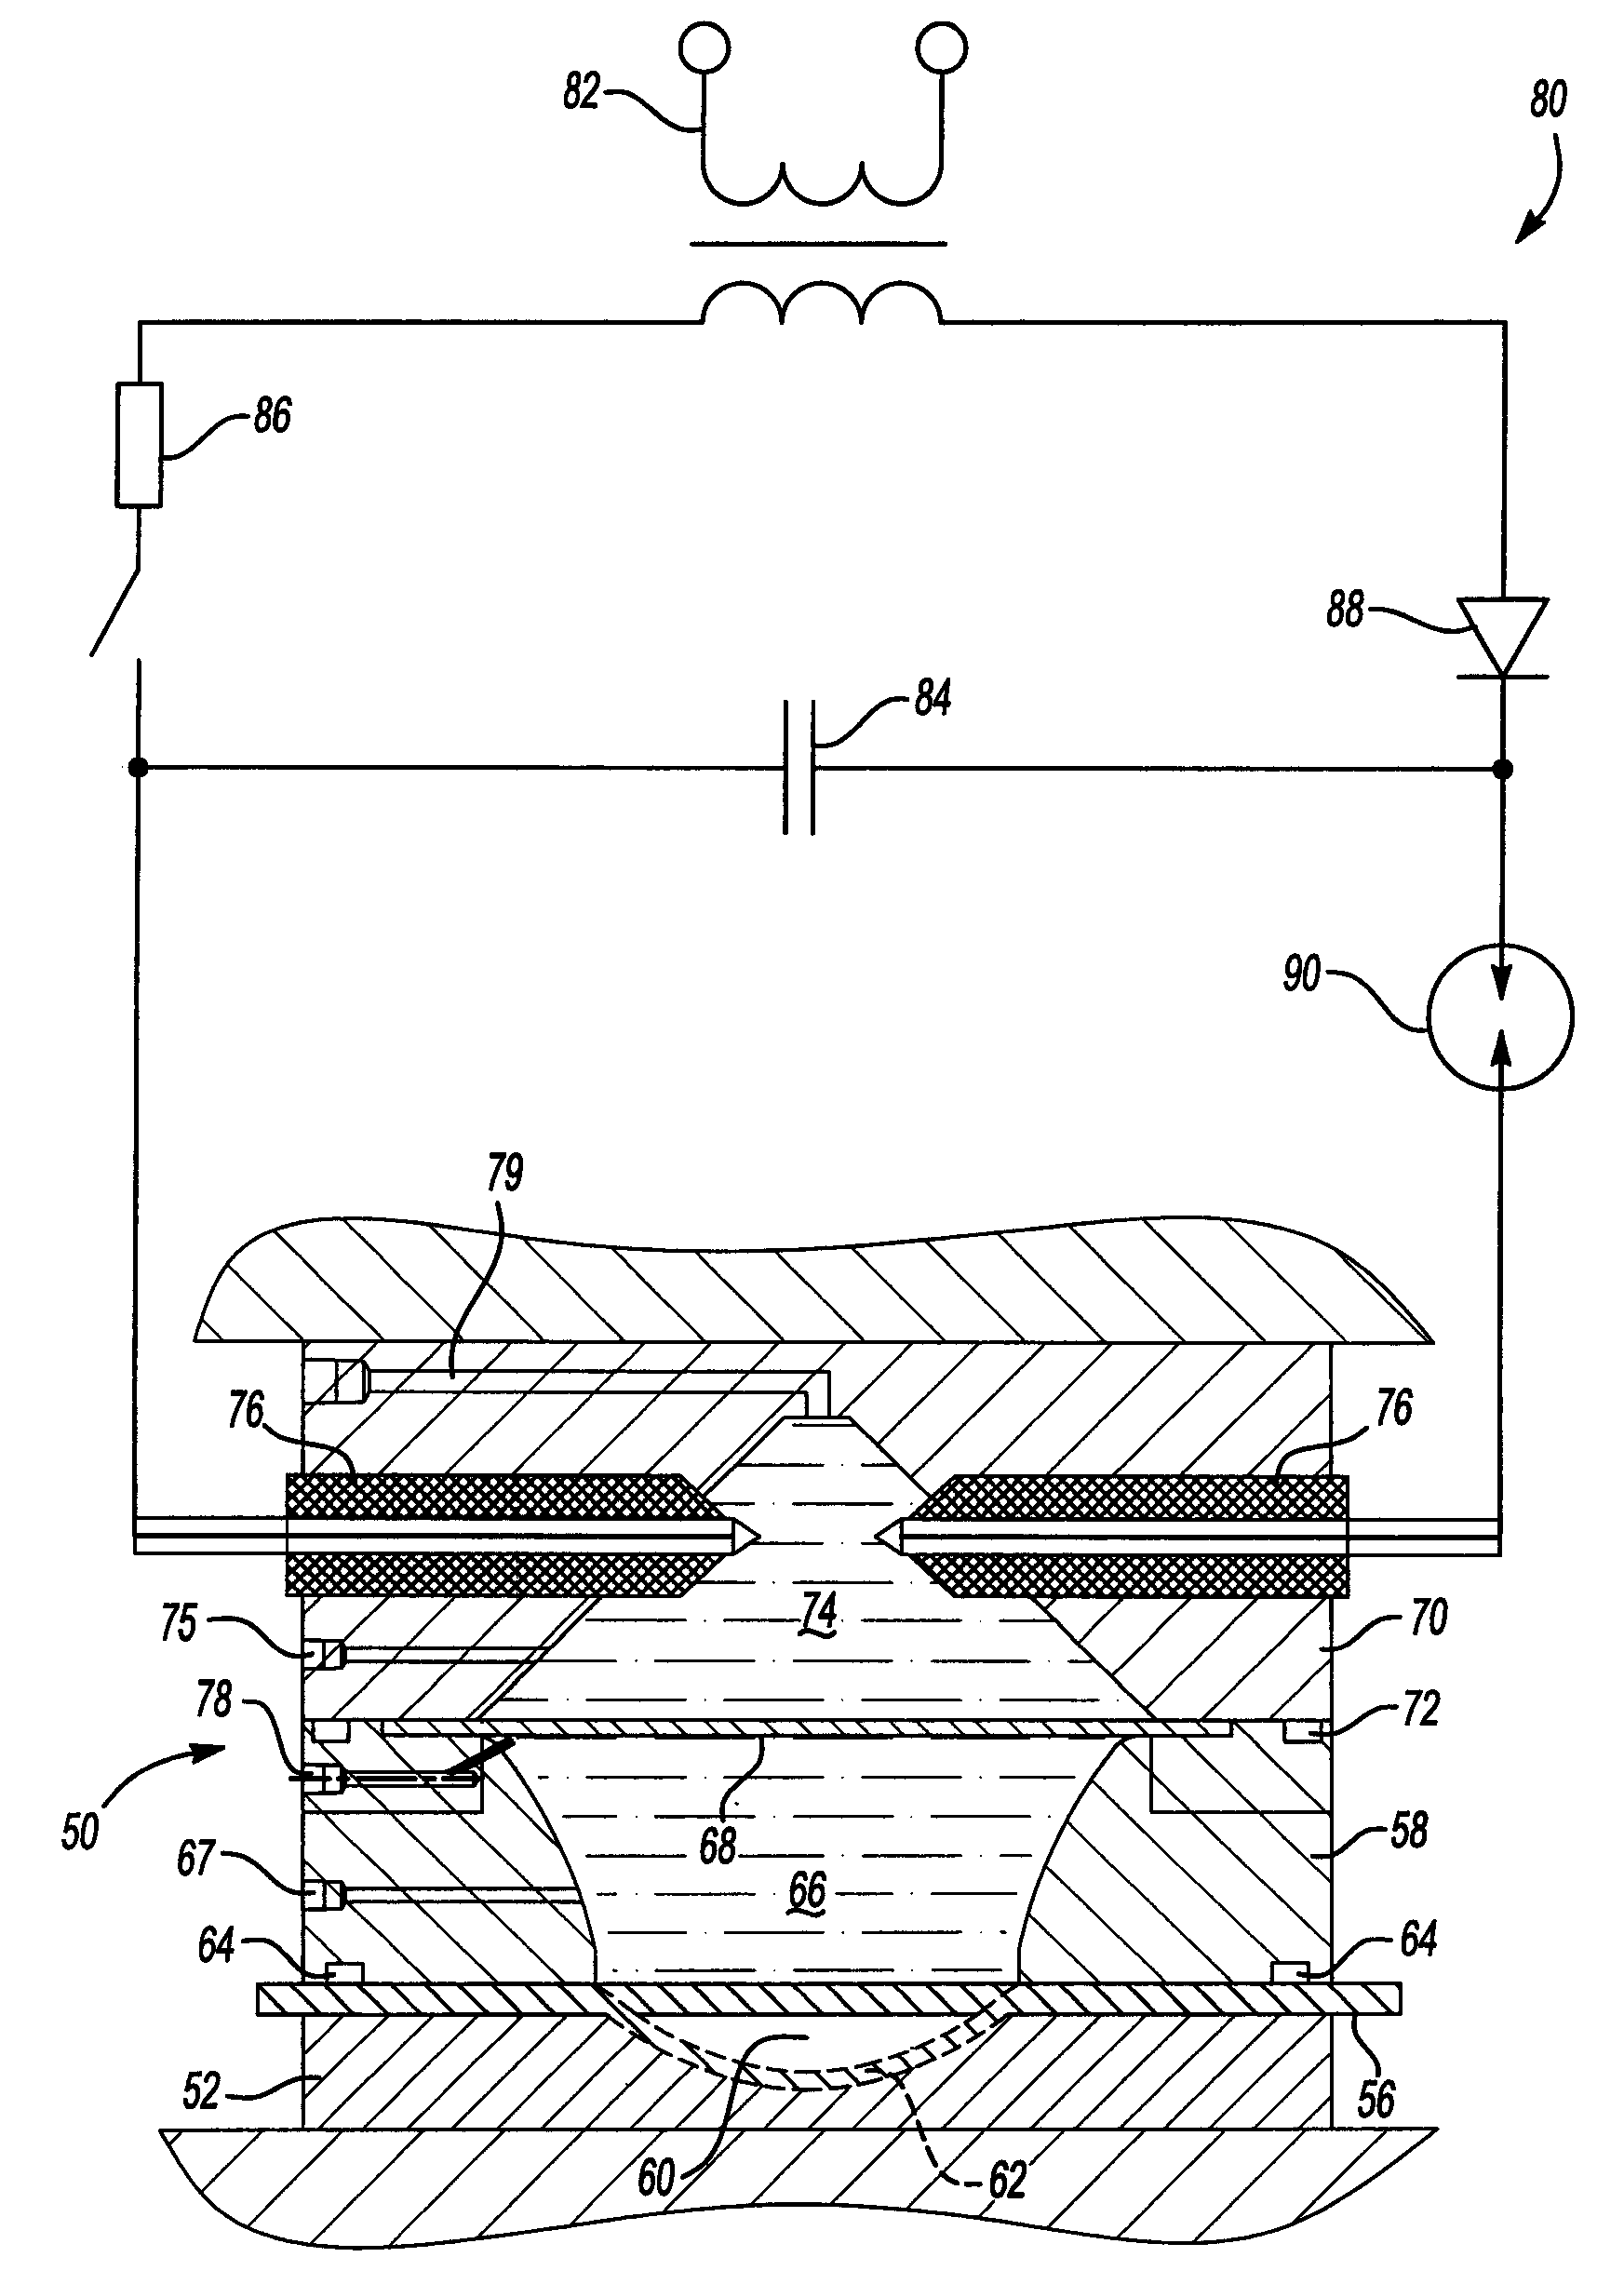 Electro-hydraulic forming tool having two liquid volumes separated by a membrane